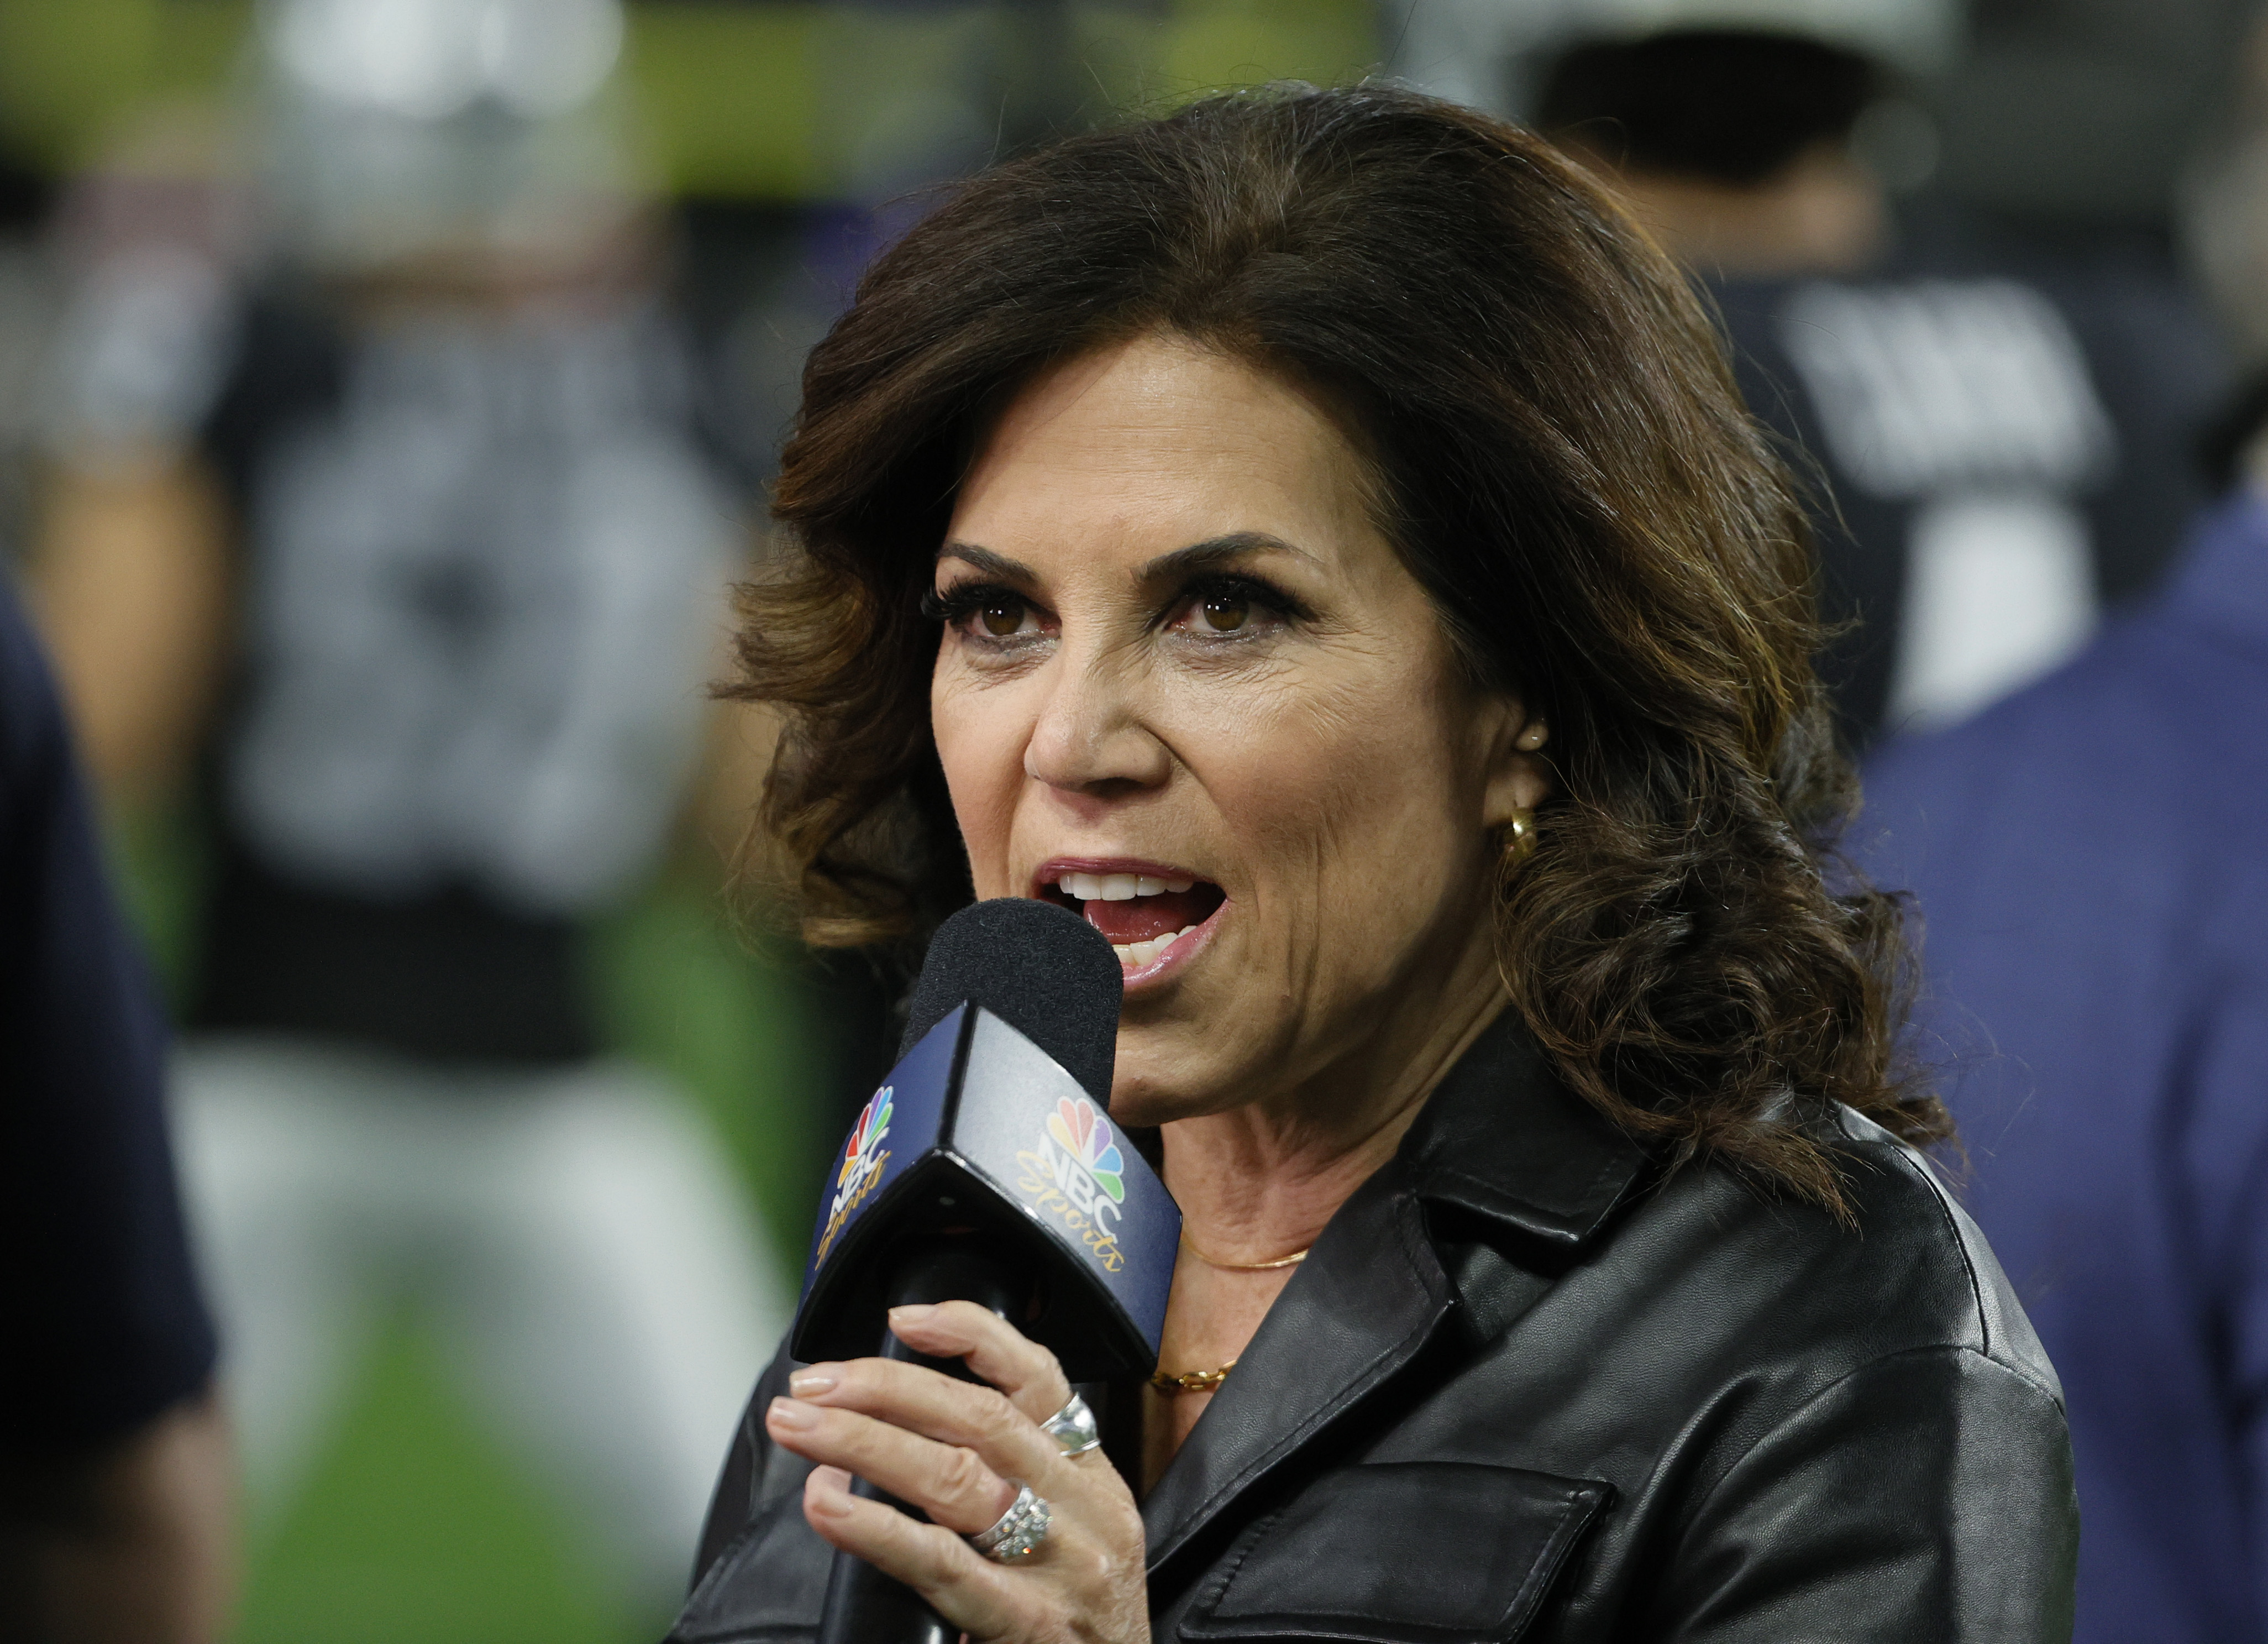 Michele Tafoya to Retire from NFL Sideline Reporting After Super Bowl 56.